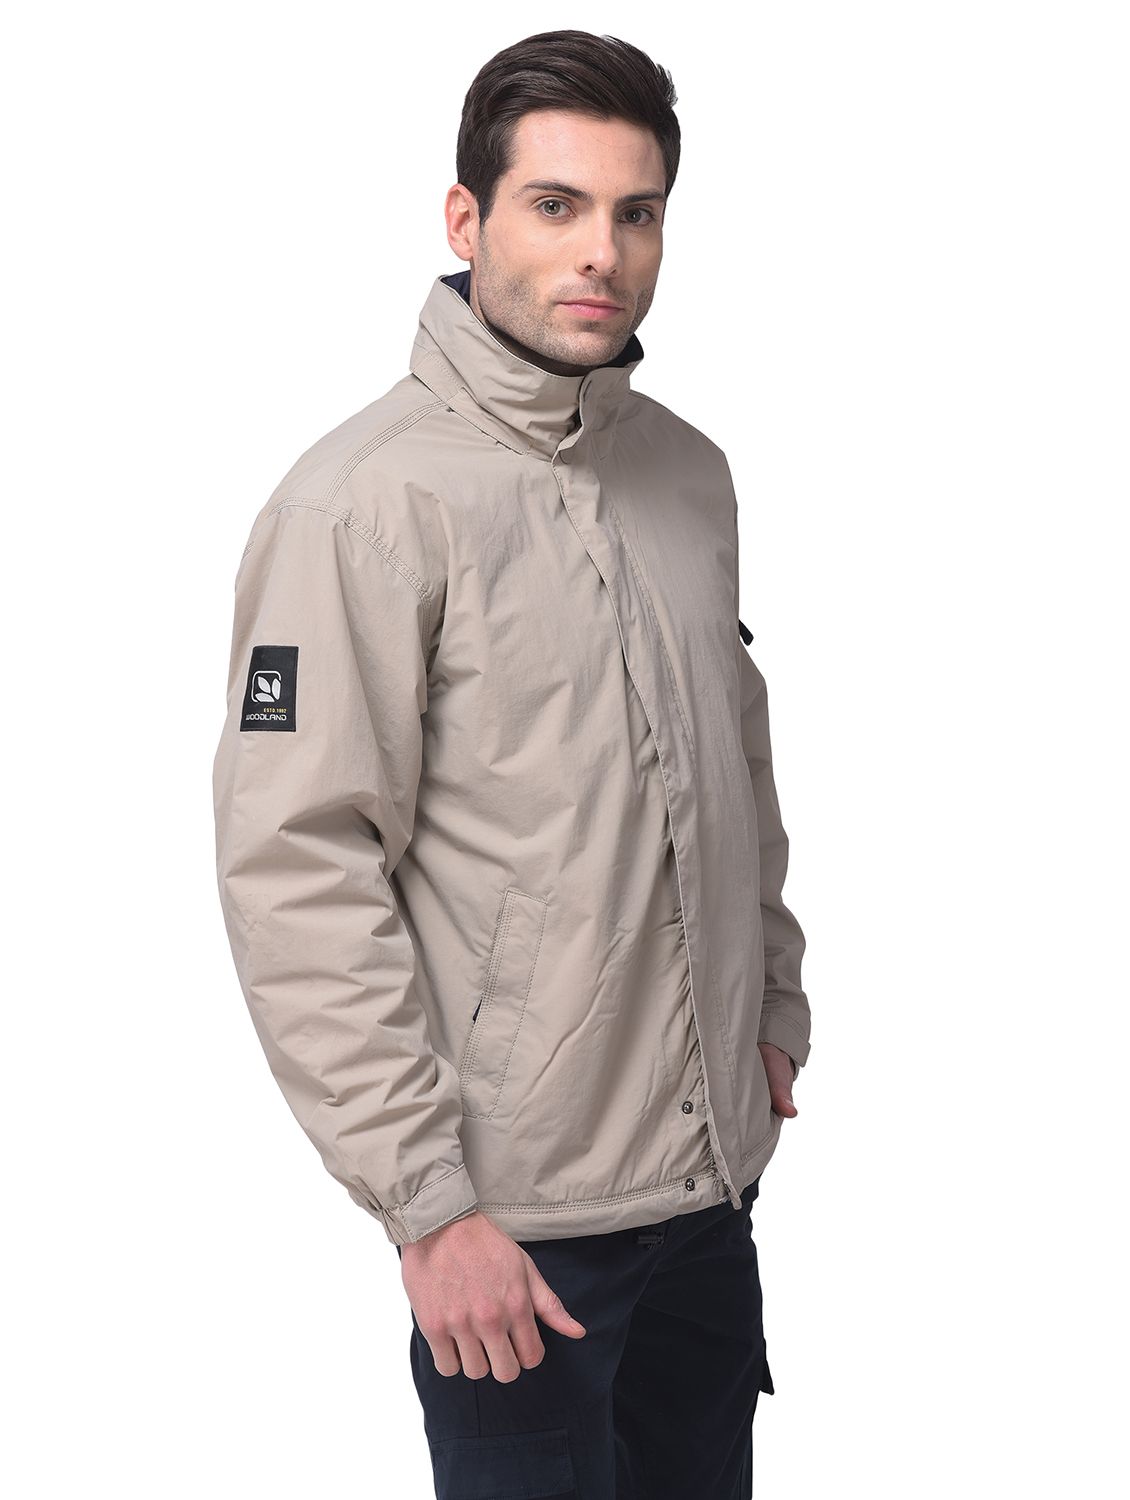 Buy Woodland Cotton Jackets Online At Best Price Offers In India